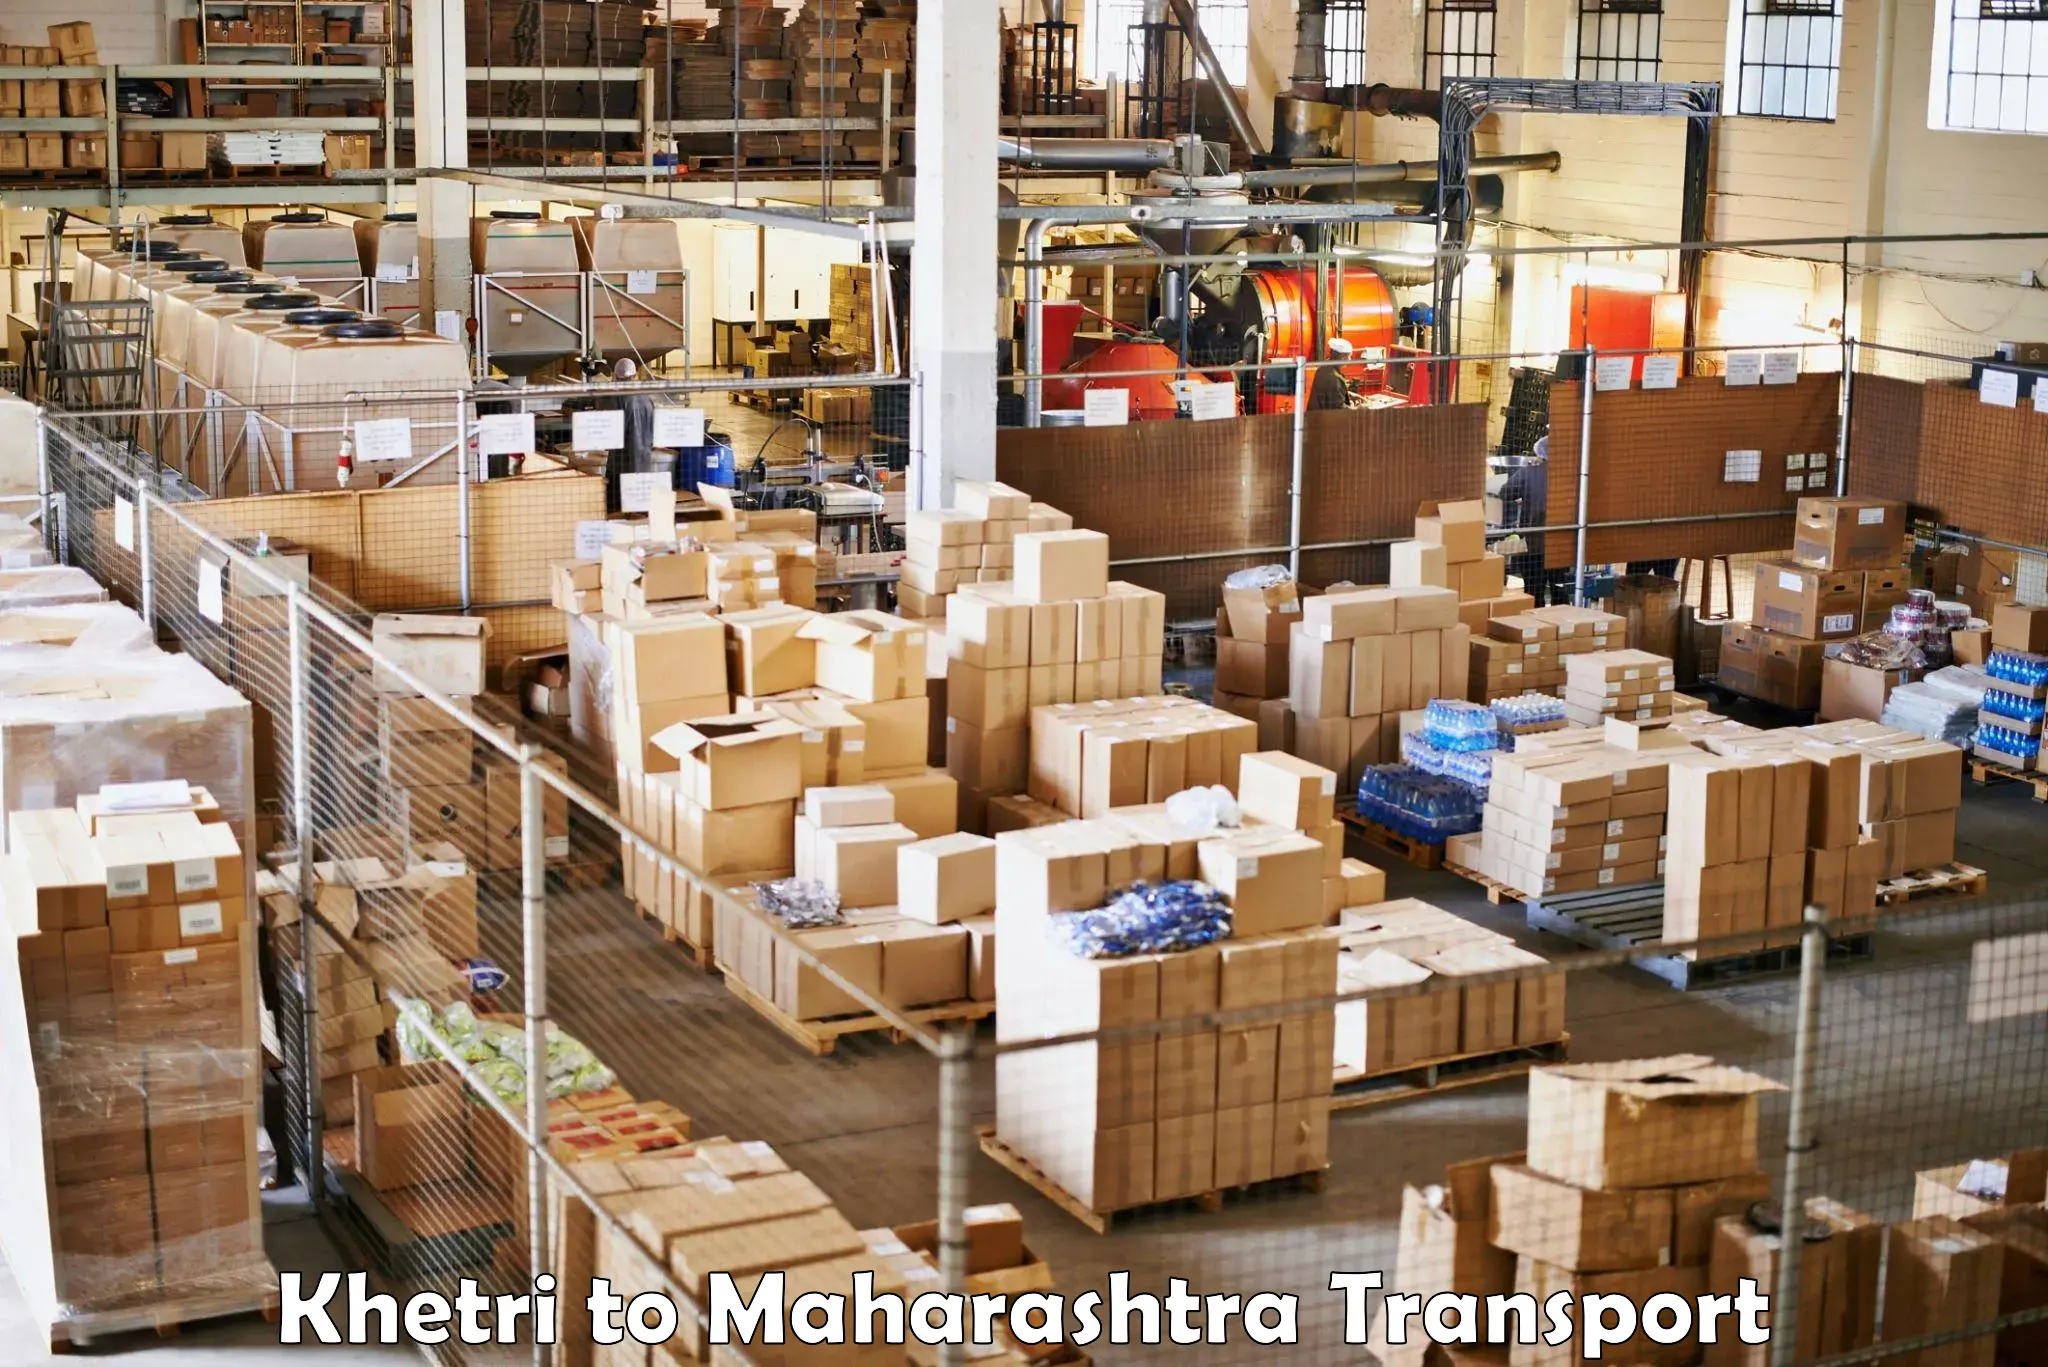 Air freight transport services Khetri to Andheri